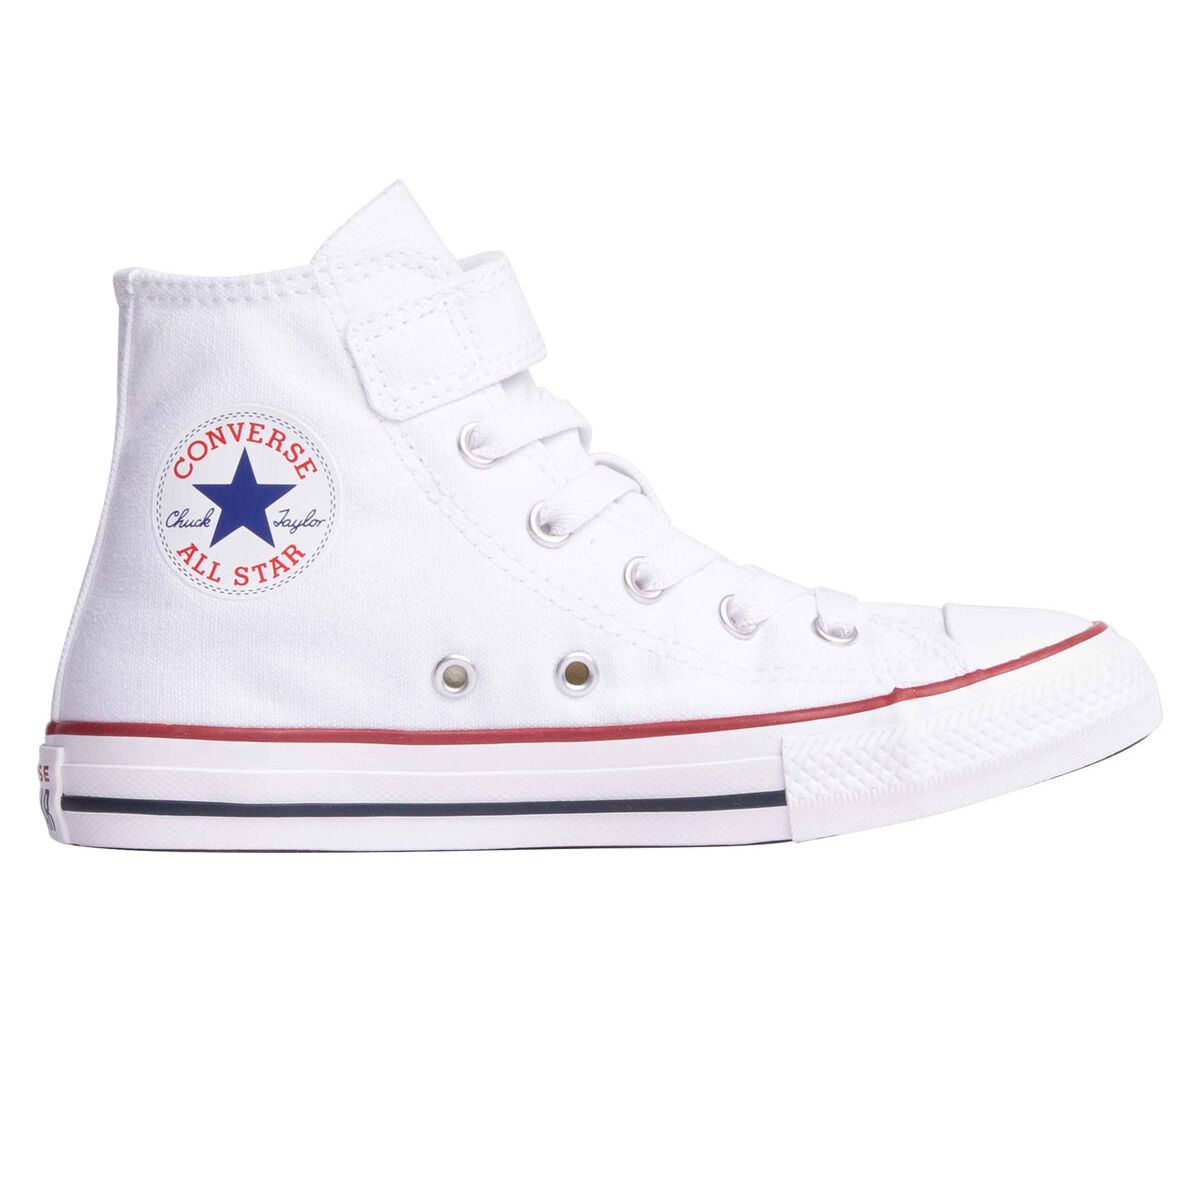 Back to School Kids White Shoes - White Runners - rebel